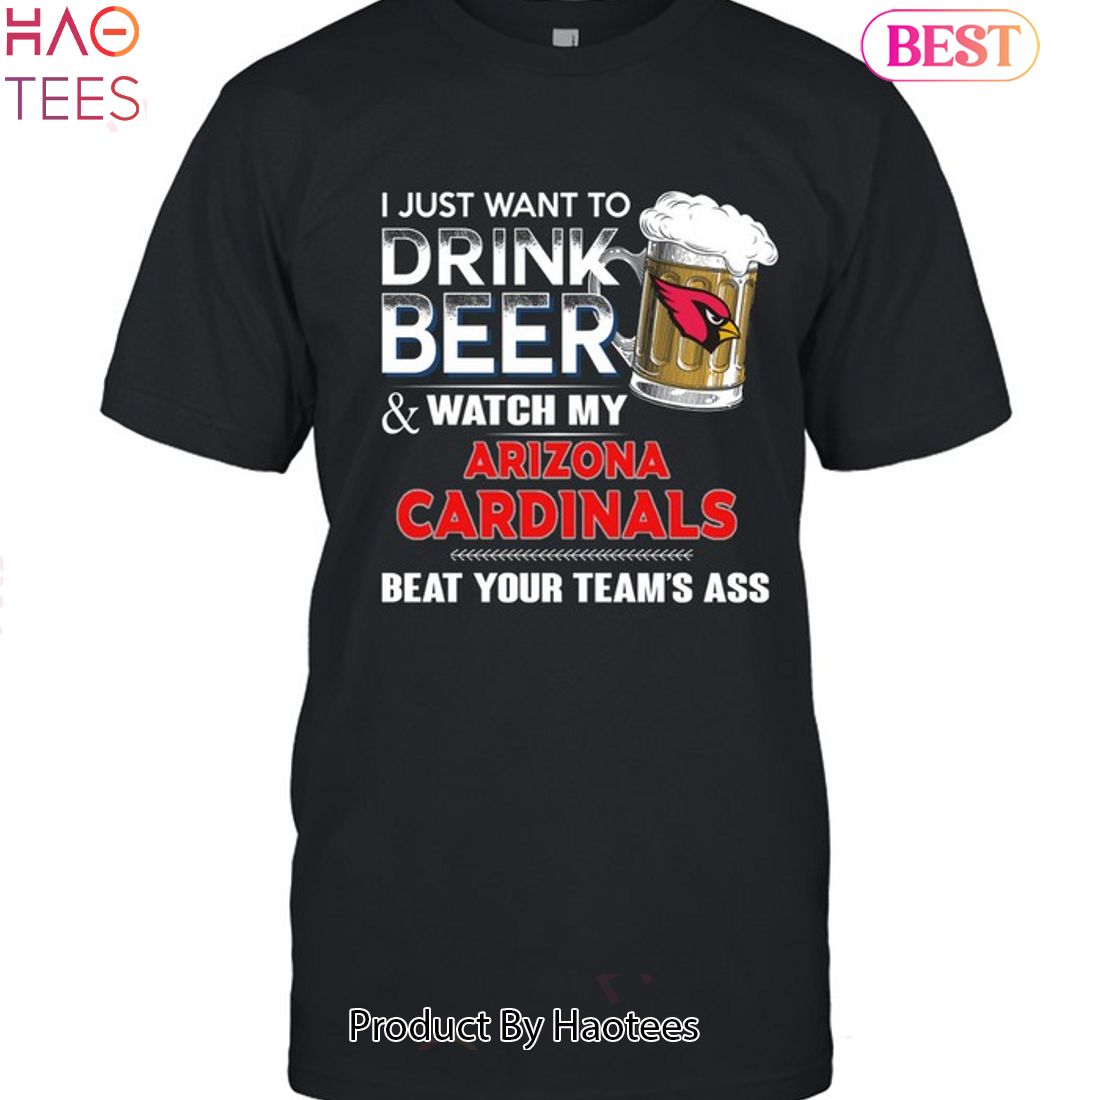 Funny i just want to drink beer & watch my arizona cardinals beat your team  ass shirt, hoodie, longsleeve tee, sweater